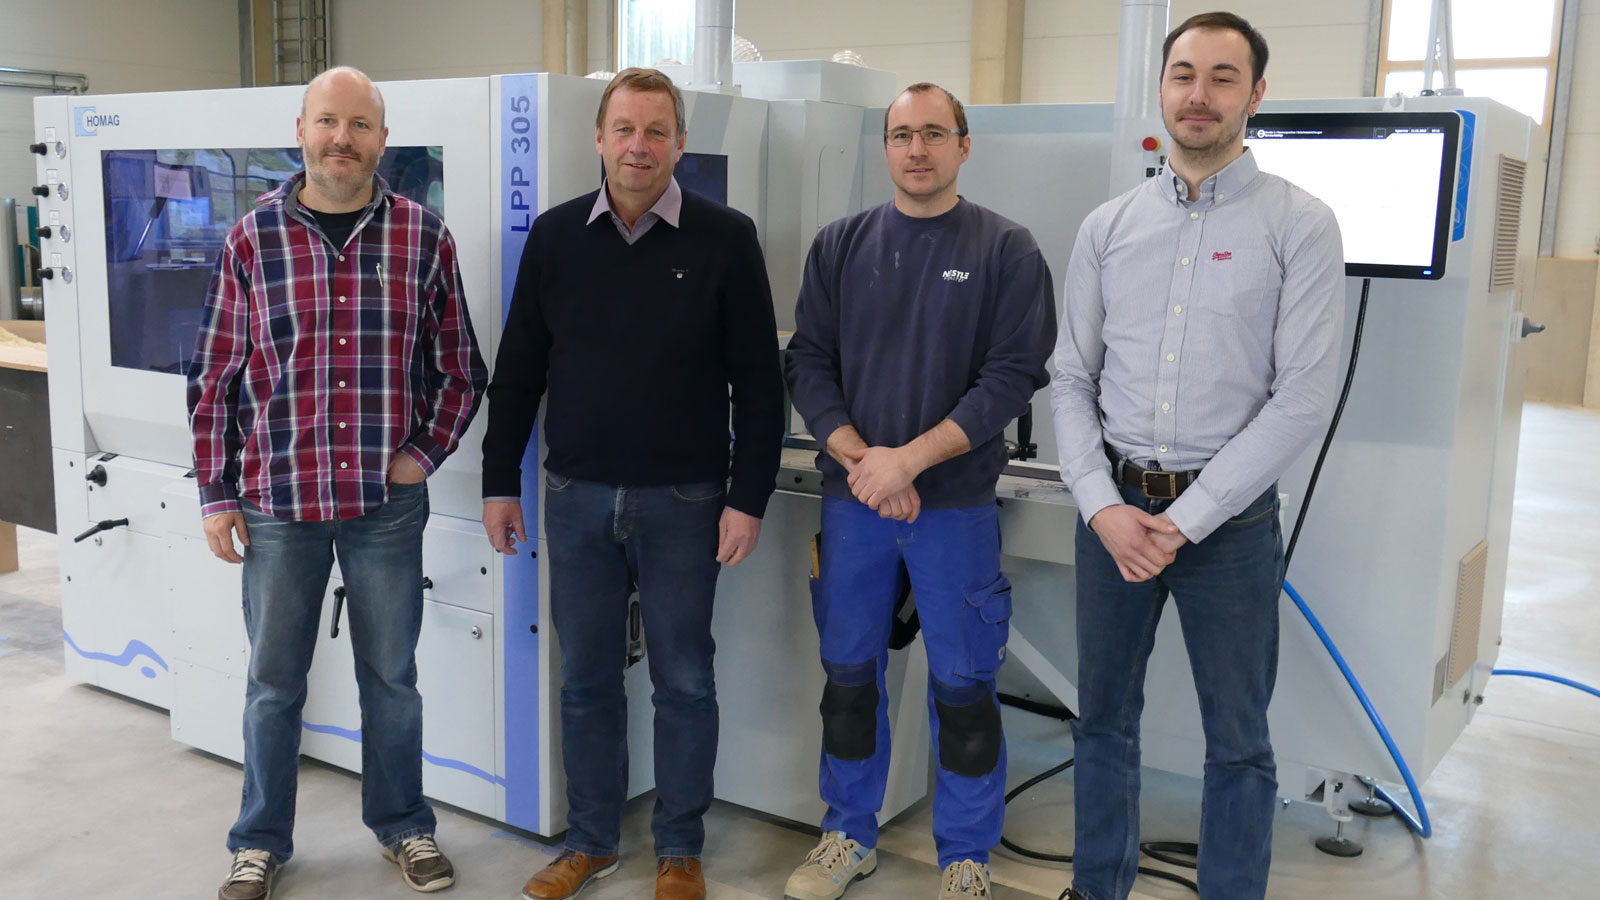 From left to right: Volker Pfefferle (Head of Work Preparation for wood and wood/aluminum), Managing Director Jürgen Nestle, Carsten Rosner (Head of Production for the wood department), Johannes Lang (Product Manager for planing machines)